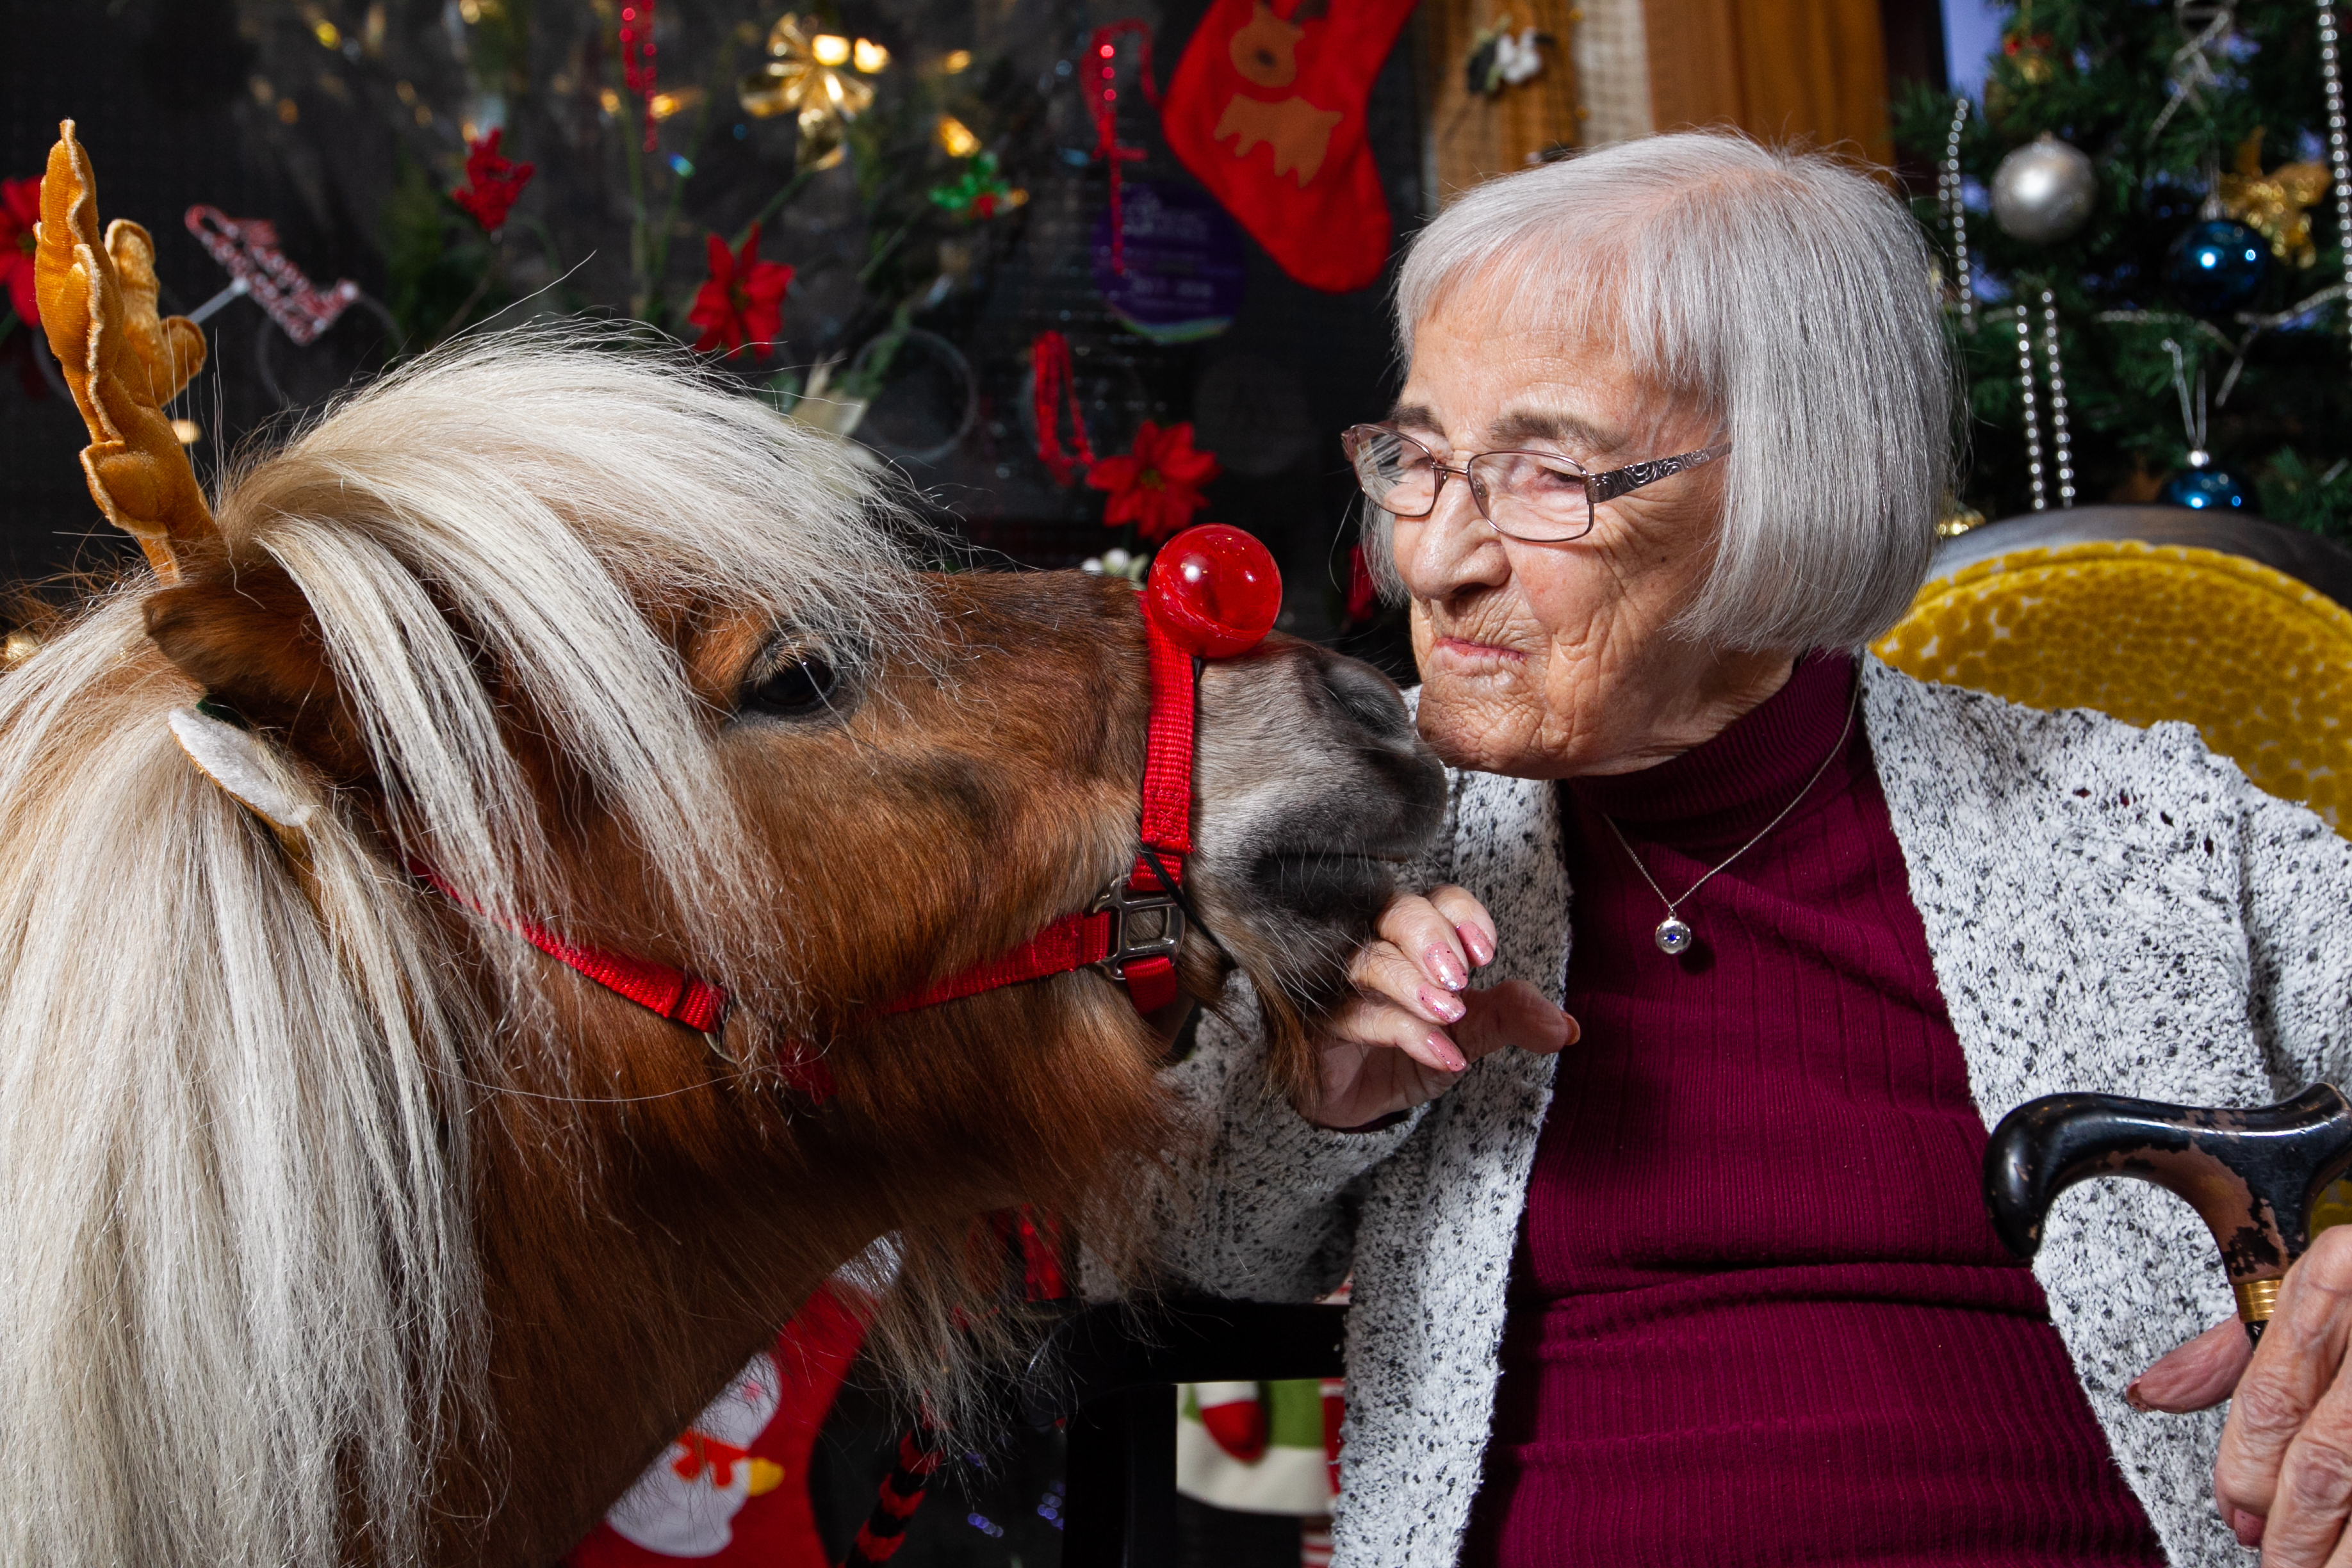 Watch Therapy Miniature Shetland Ponies Visit Elderly Care Homes As 